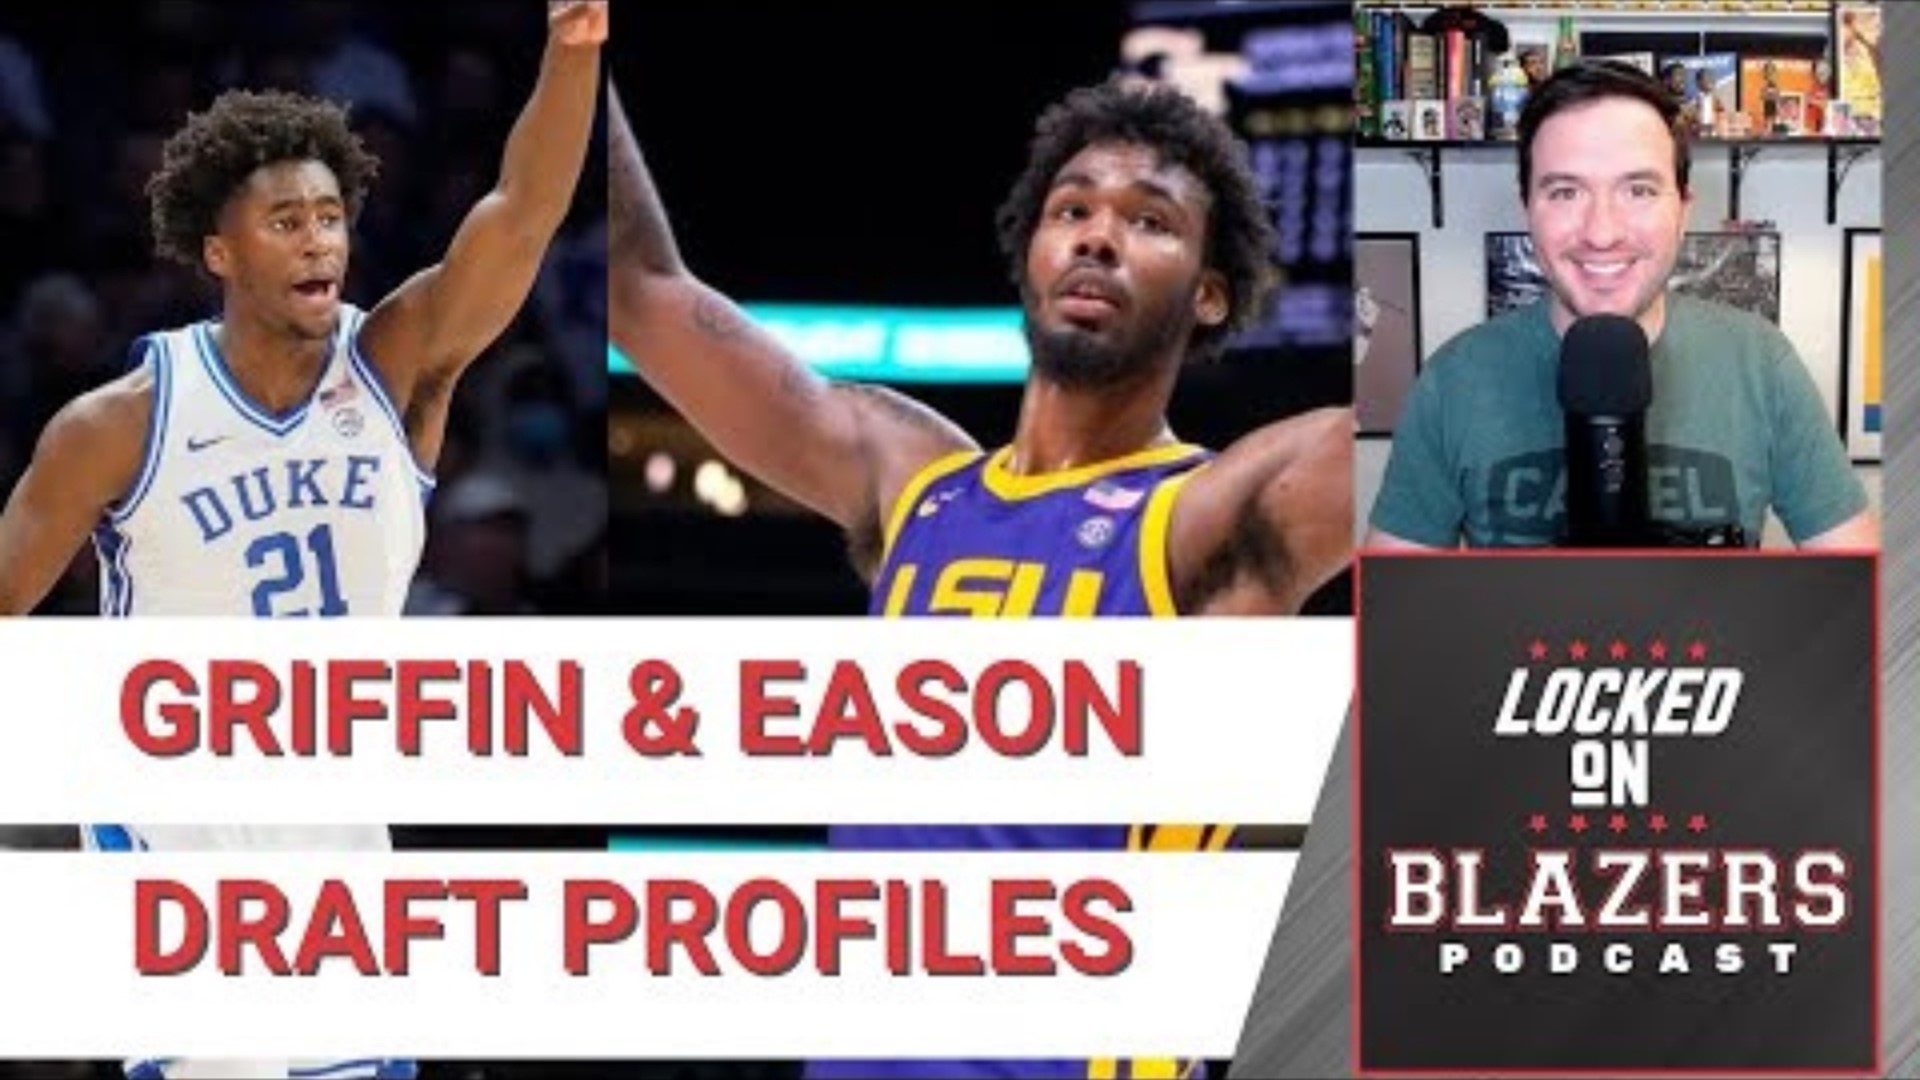 Duke forward AJ Griffin and LSU forward Tari Eason worked out for the Trail Blazers last week. Would they make good targets for Portland in the 2022 NBA draft?